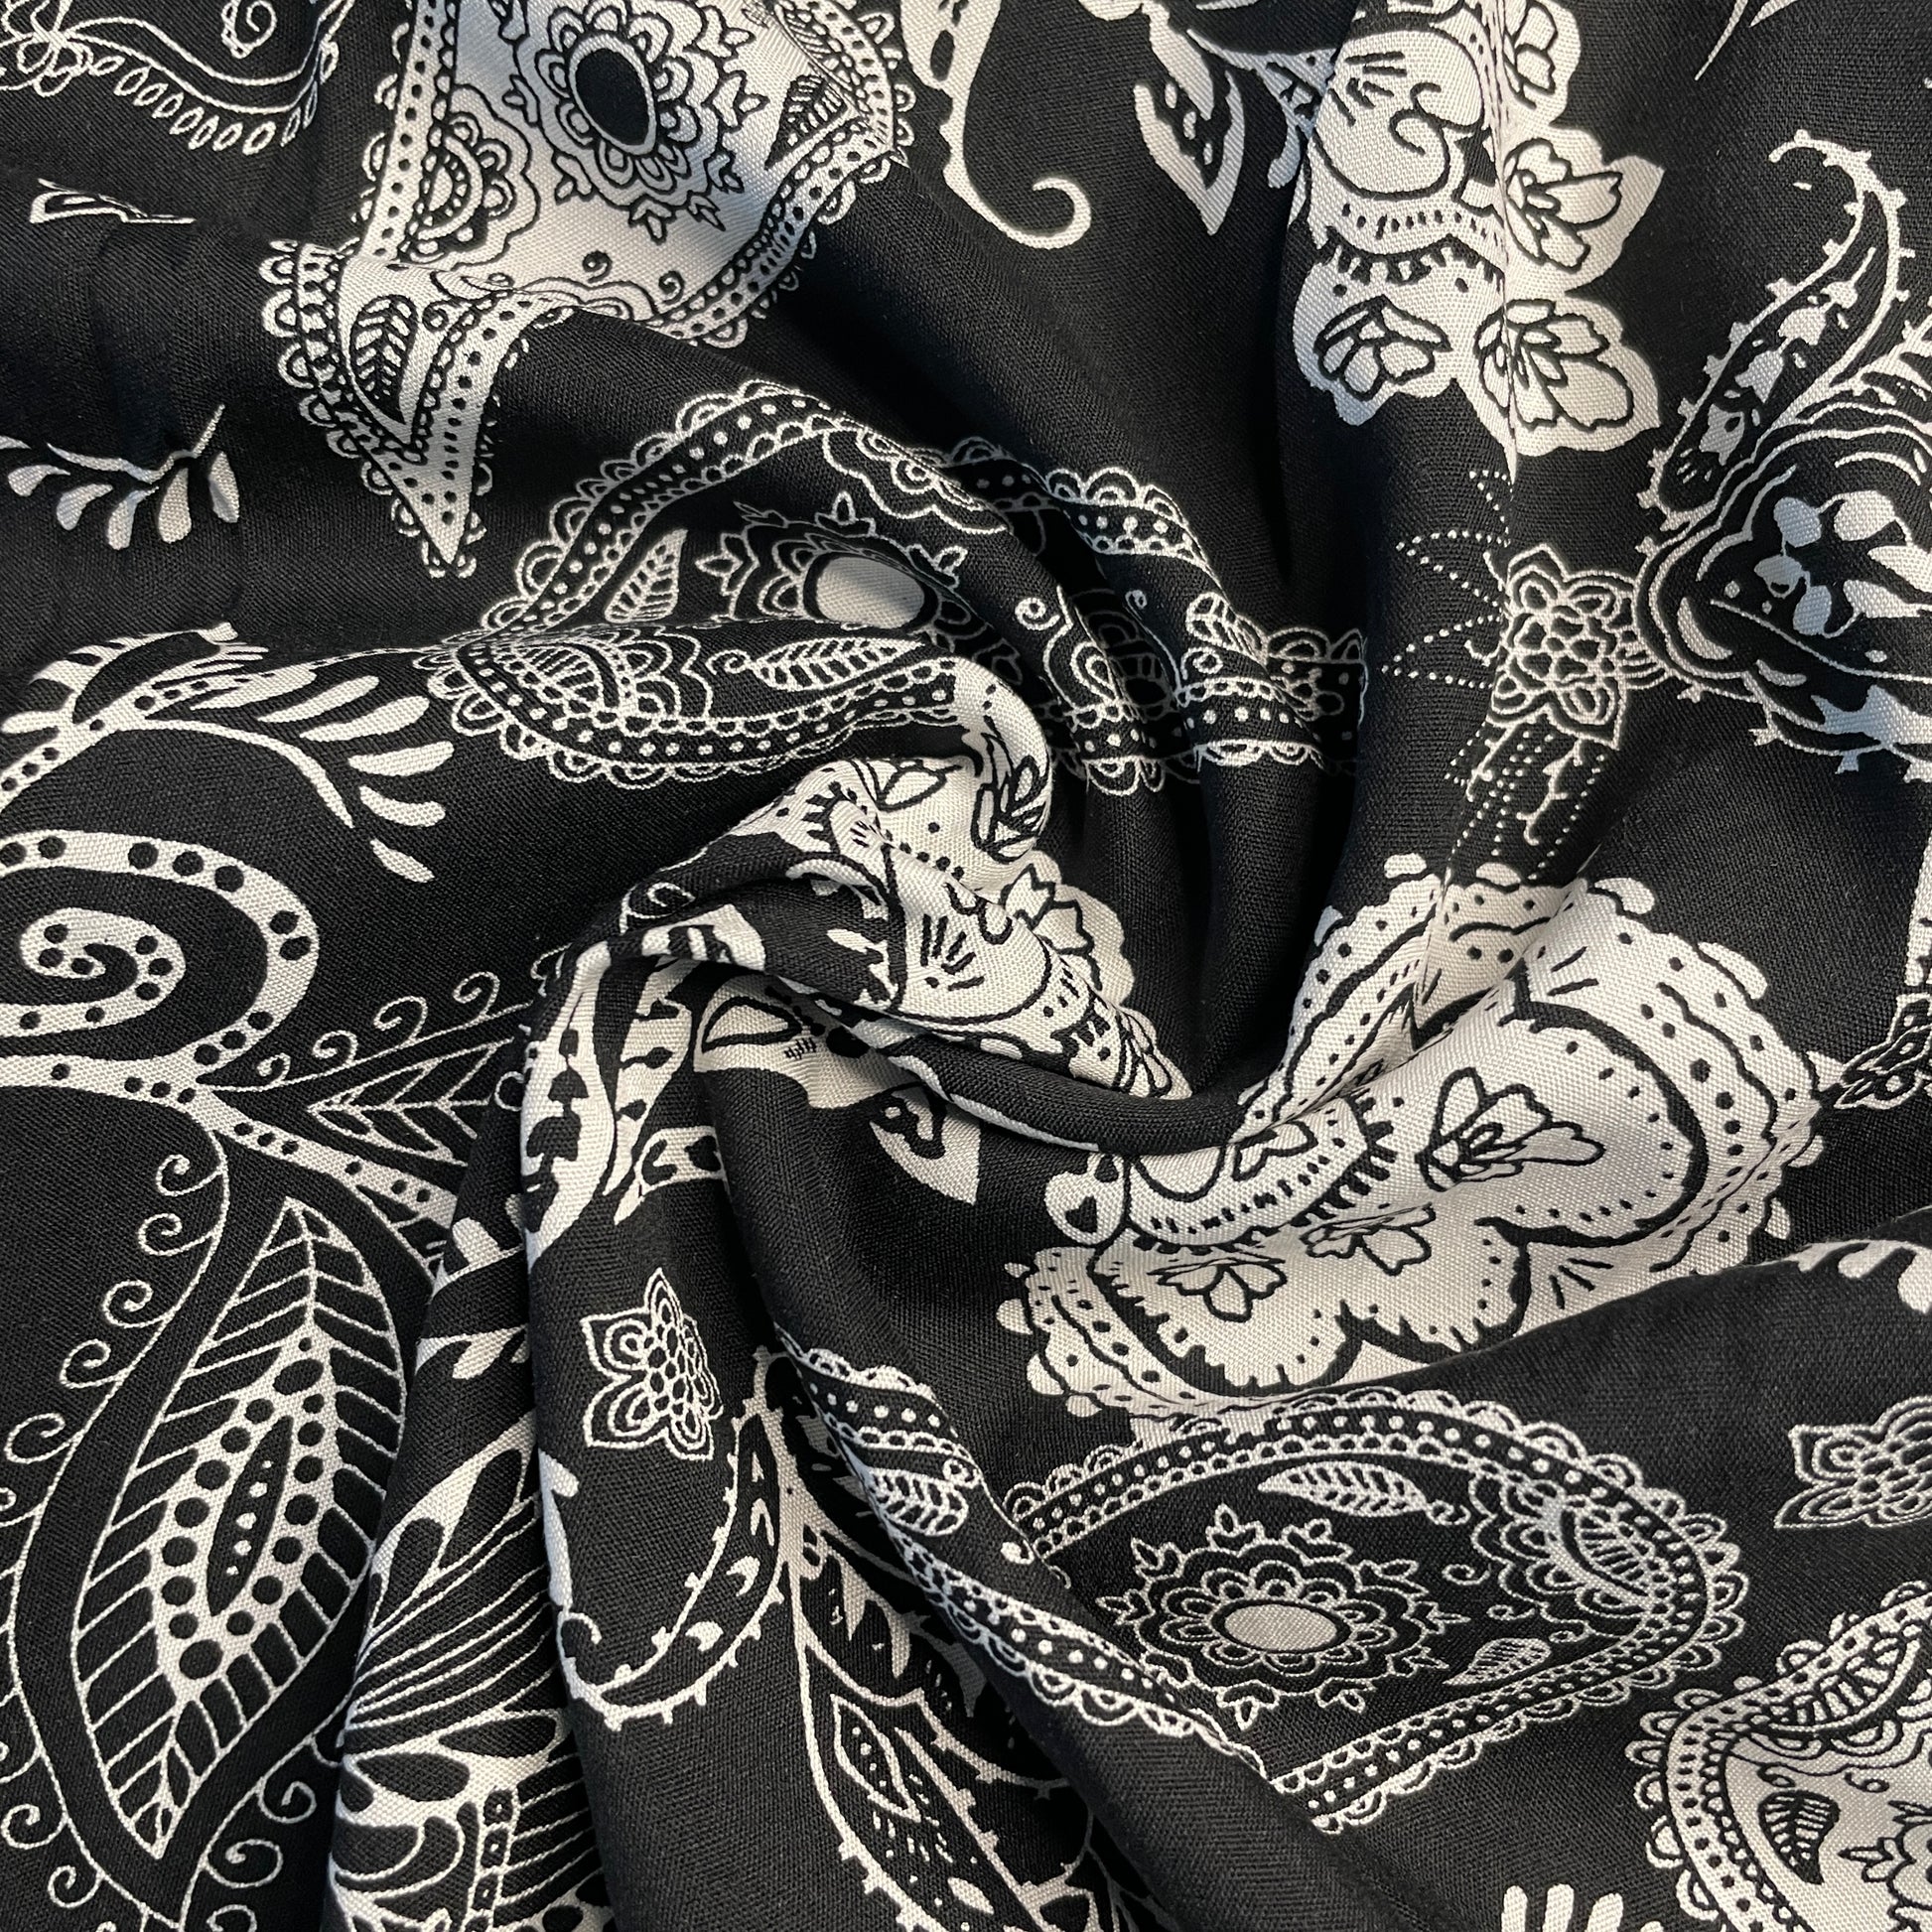 Exclusive Rayon Fabric Black White Tropical Print FabricExclusive Rayon Fabric Black White Tropical Print Fabric